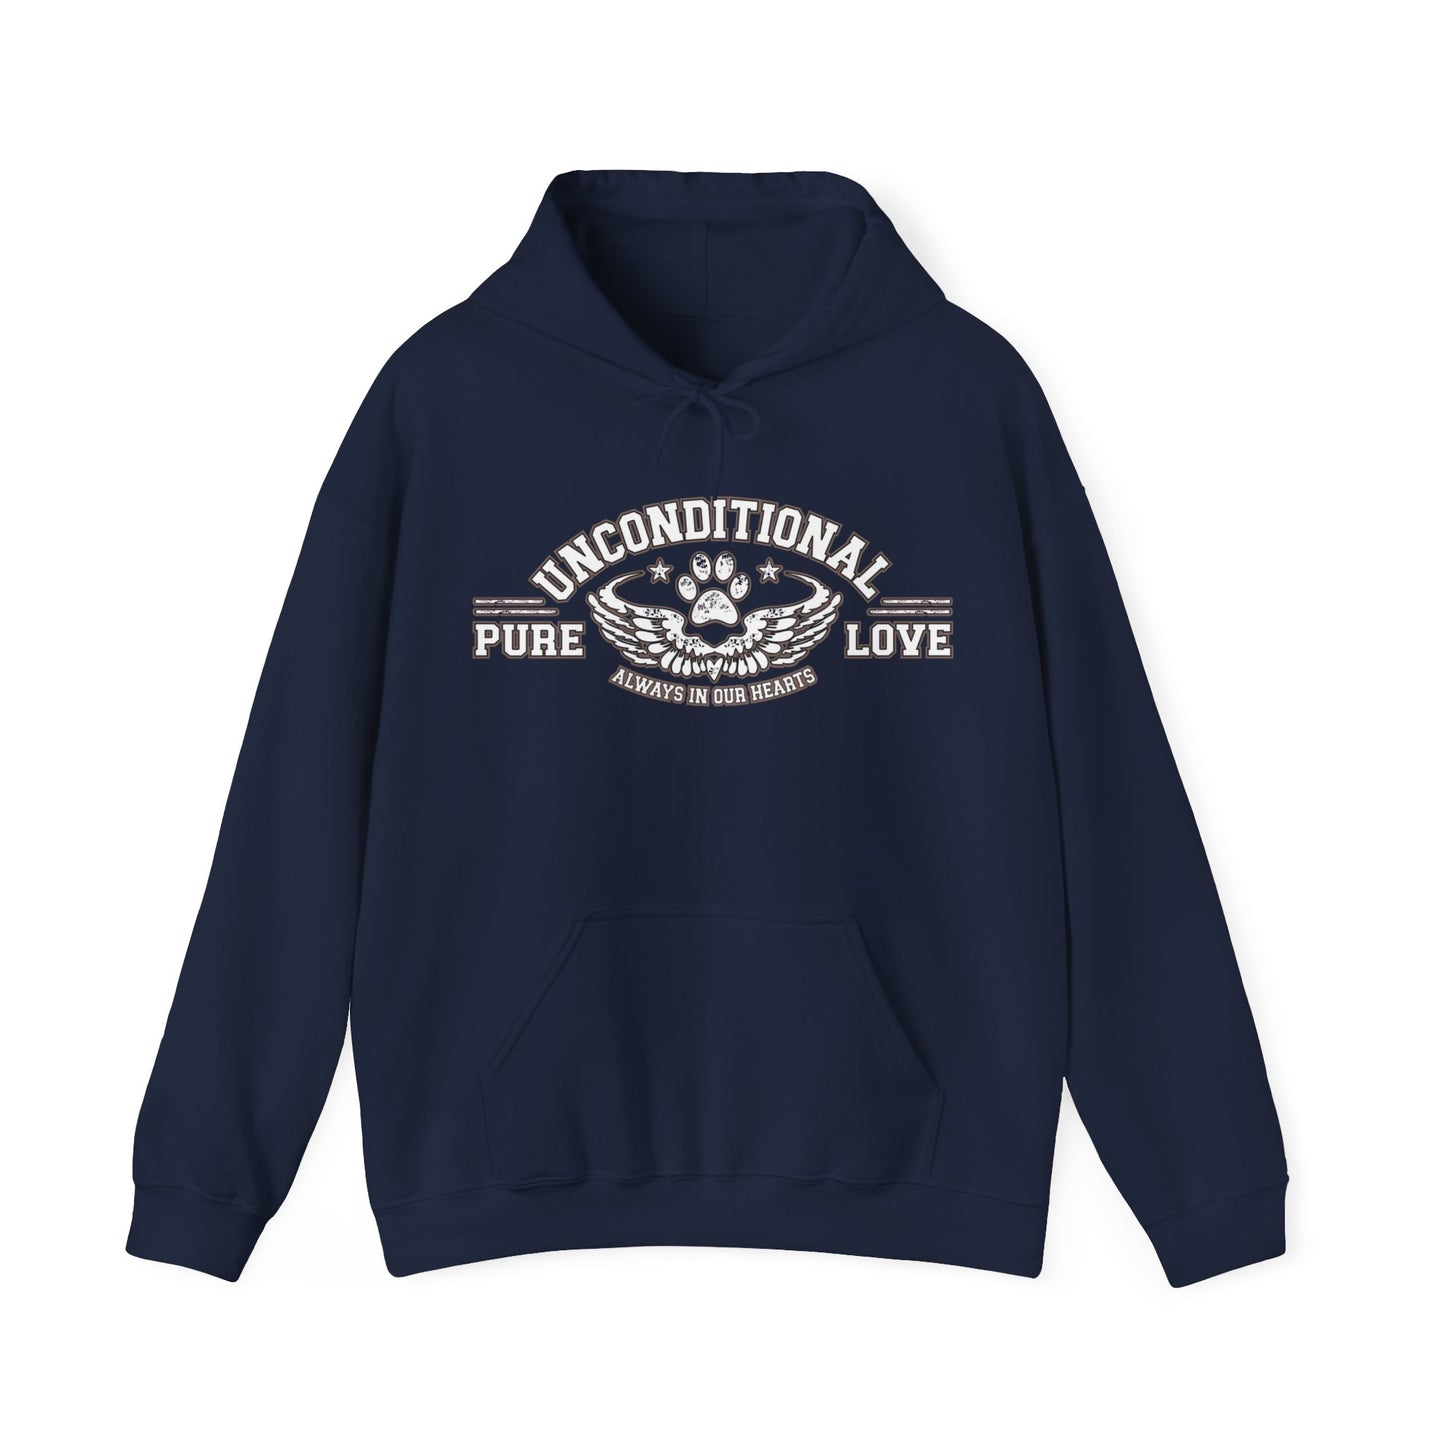  The Dogs Pure Love unisex hoodie, rendered in navy blue, gracefully displays the empowering slogan 'Unconditional Pure Love, always in our hearts.' This powerful message is set against a backdrop of pristine white.